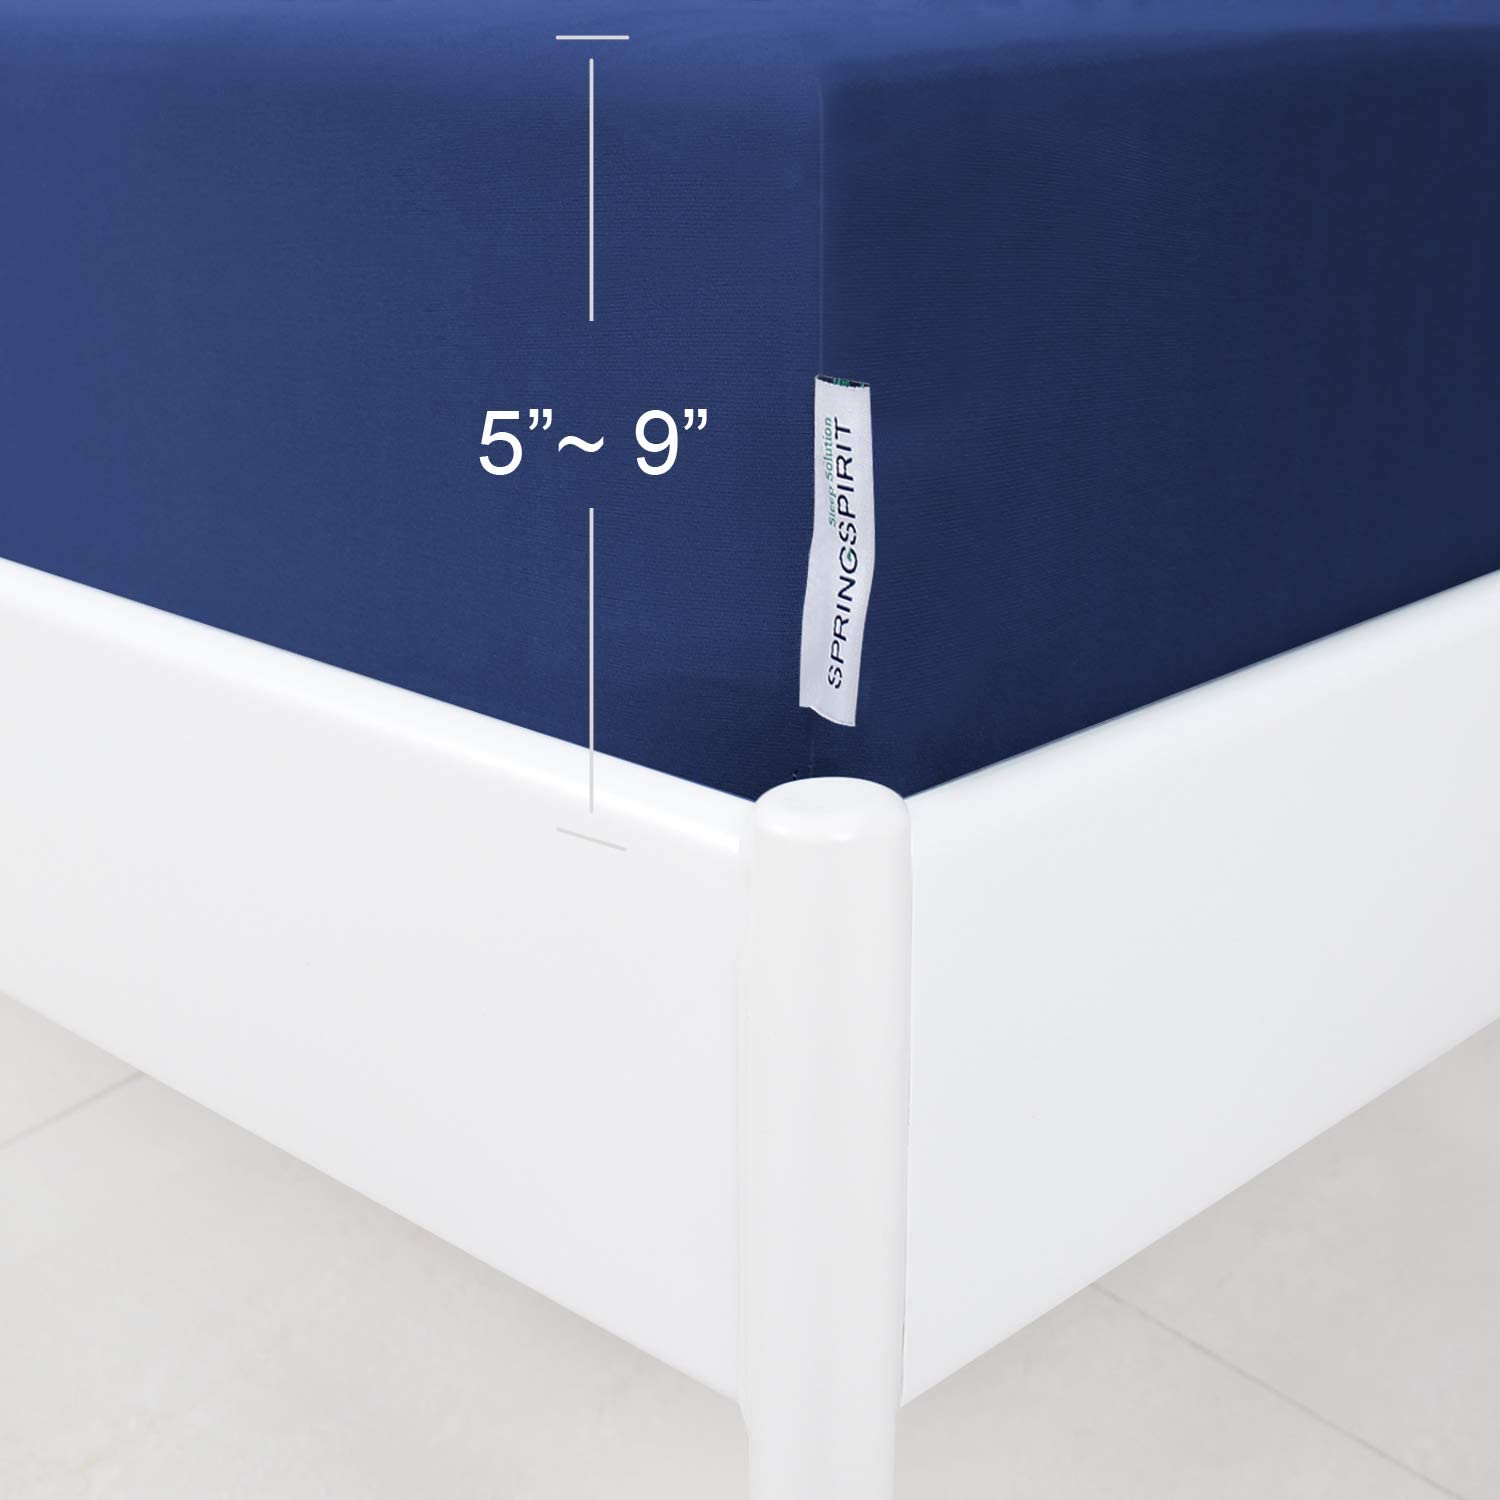 Twin Size Box Spring Cover with Smooth and Elastic Woven Material, Alternates for Bed Skirt, Wrinkle & Fading Resistant, Washable, Dustproof, Navy - Biloban Online Store